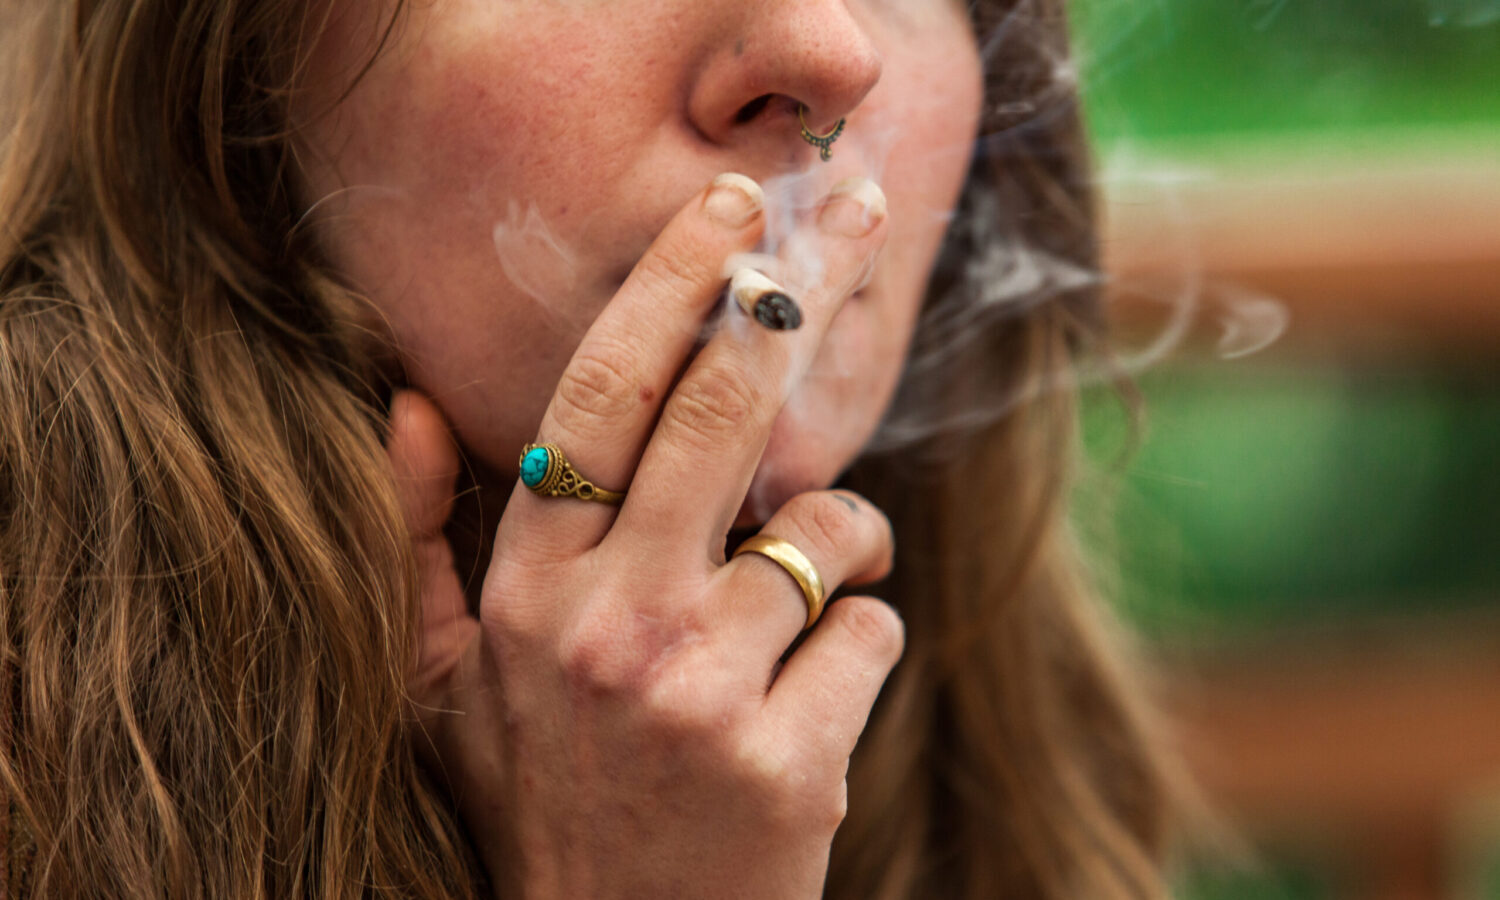 Marijuana Users Are More Likely To Need Emergency Care, Per New Study